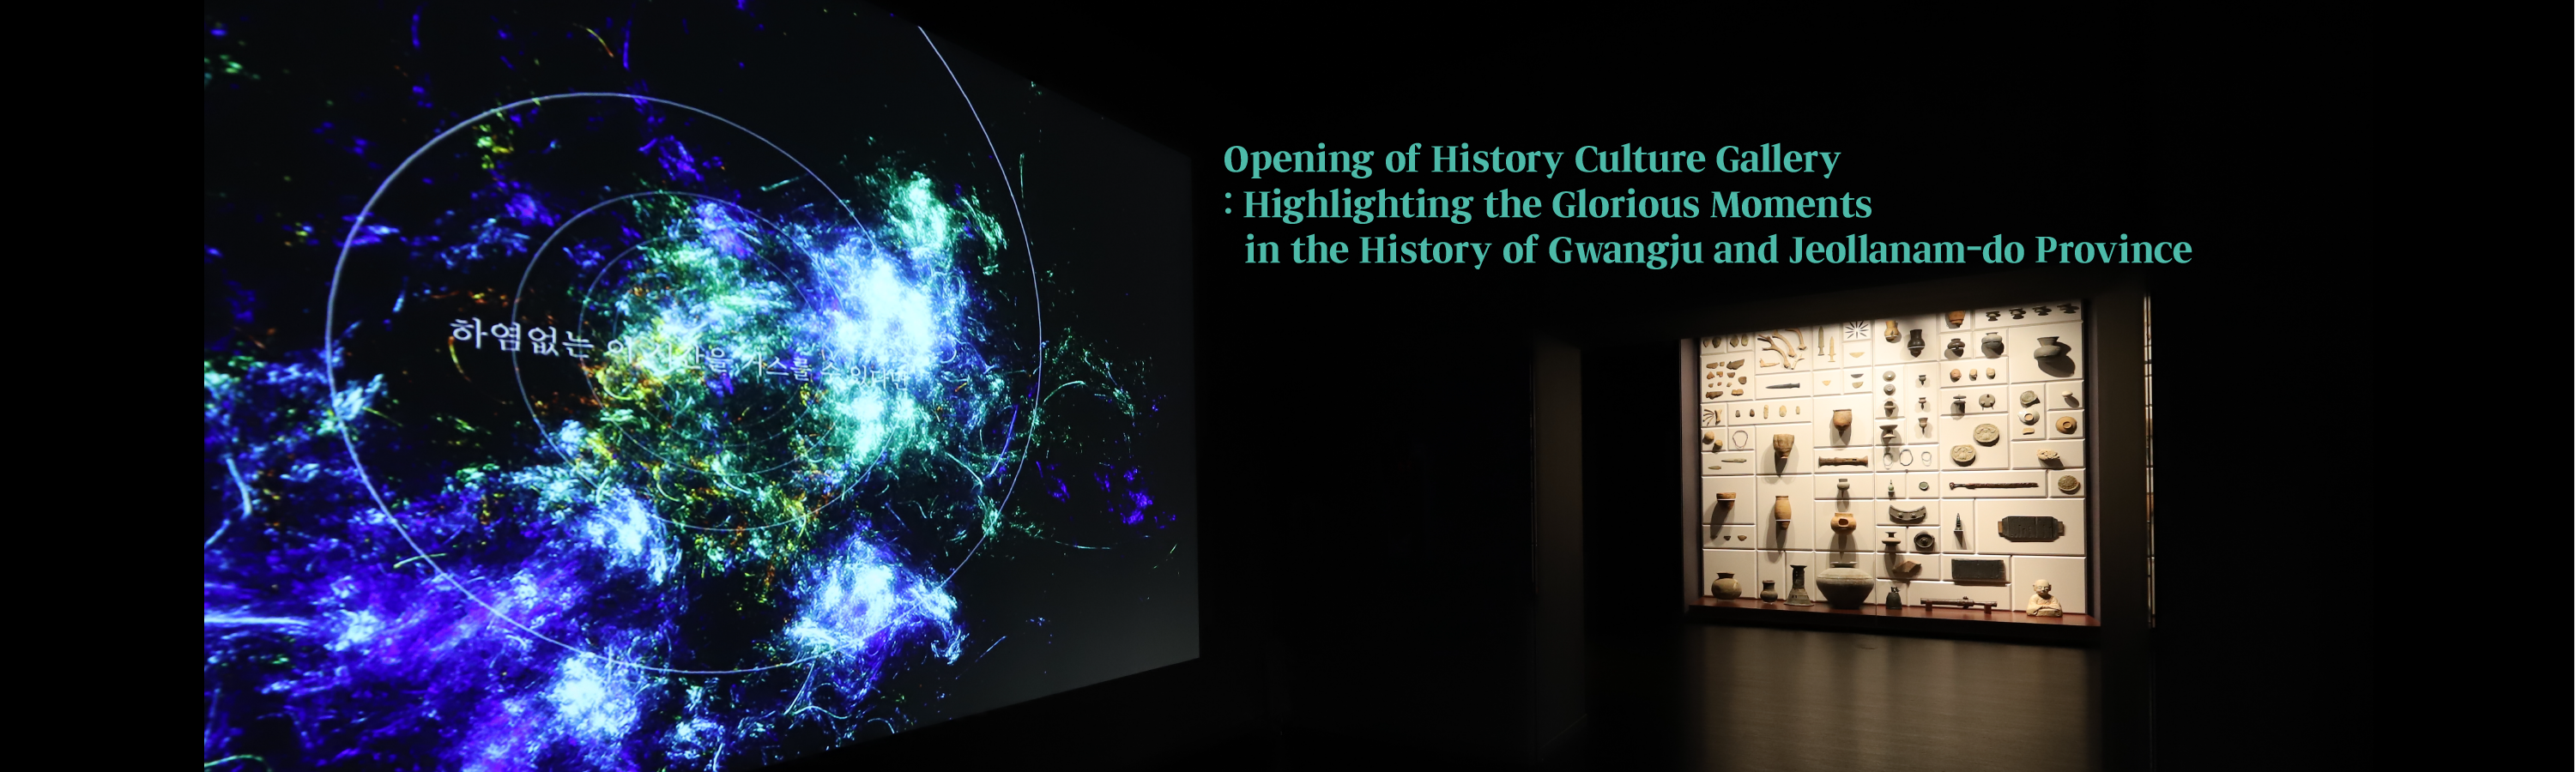 Opening of History Culture Gallery